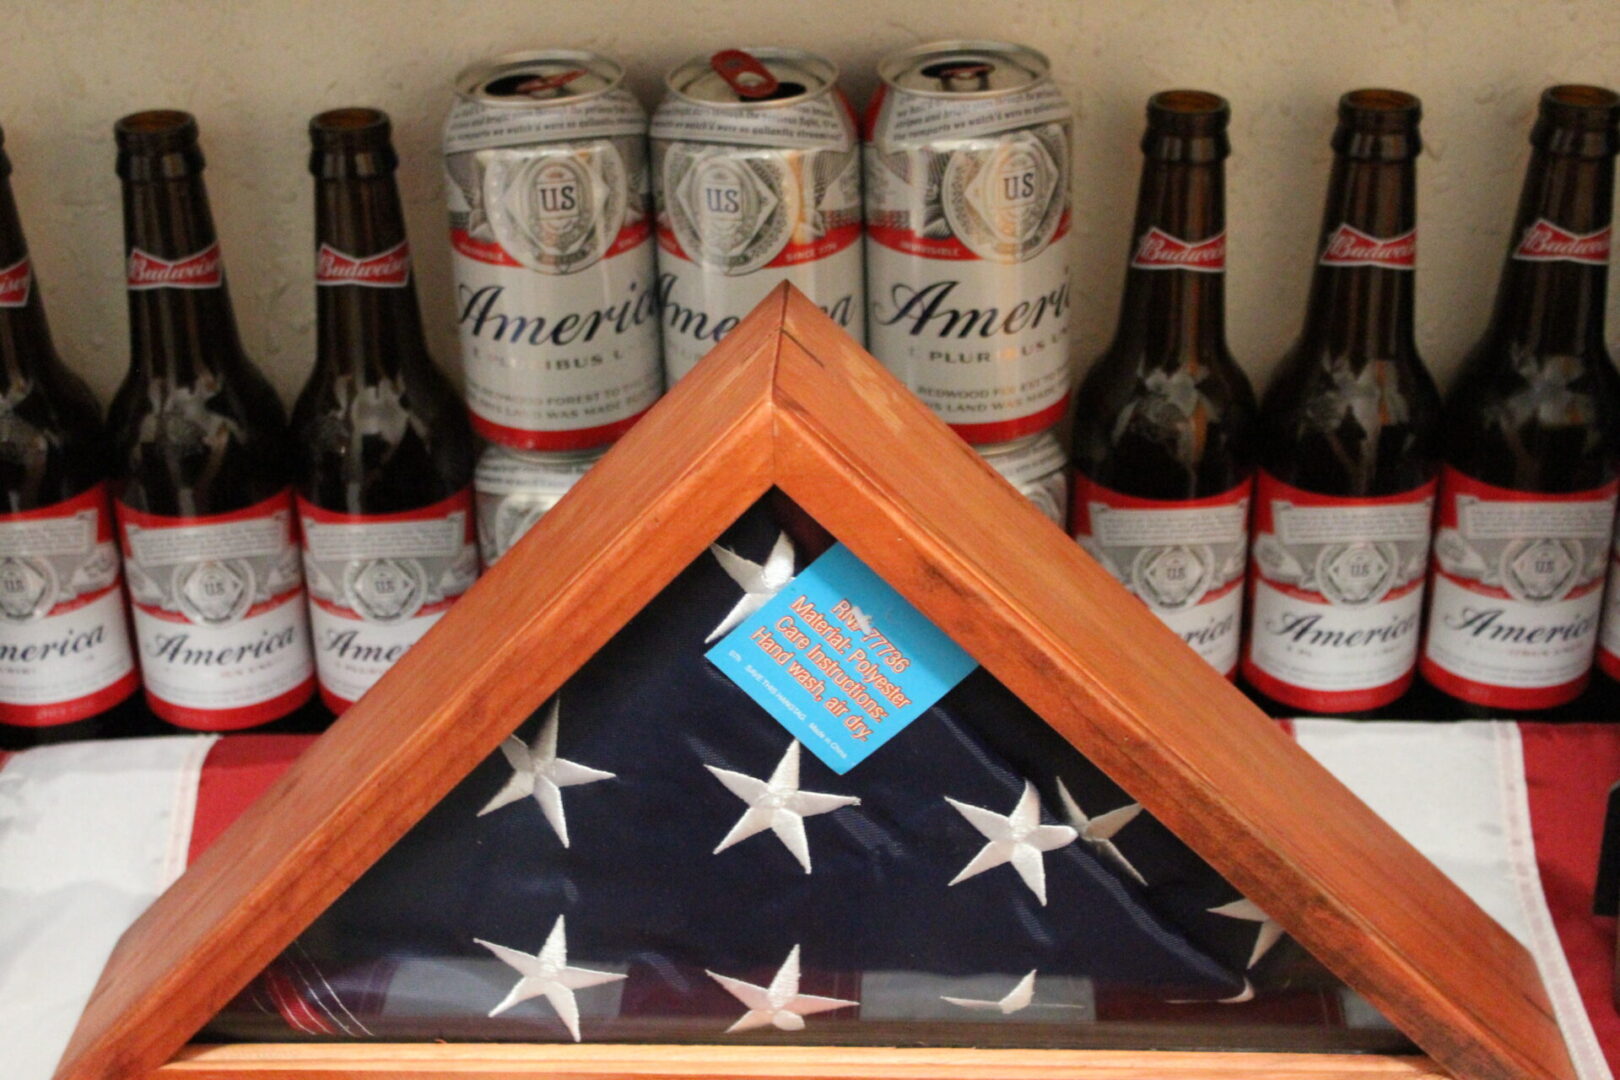 Wooden box with a cloth under it and some beer bottles